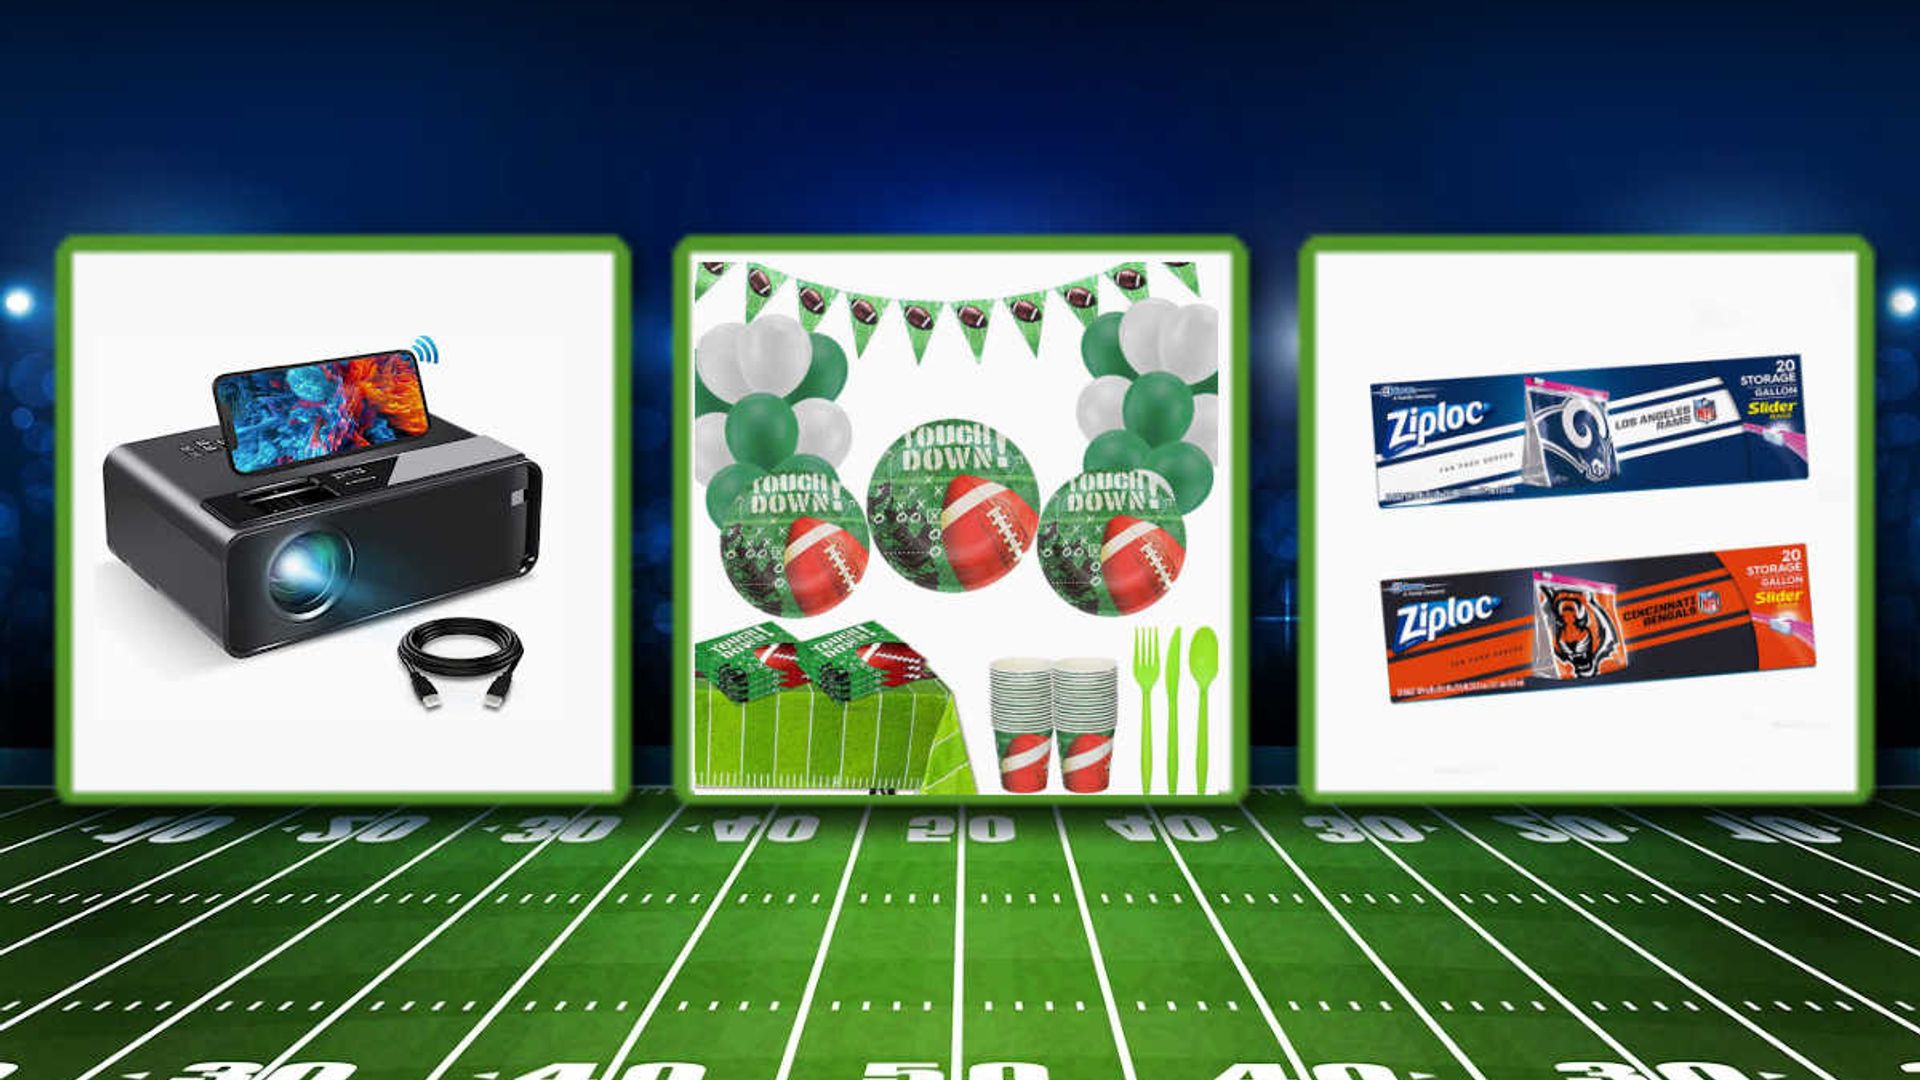 10 Super Bowl Sunday party essentials that will arrive before game day